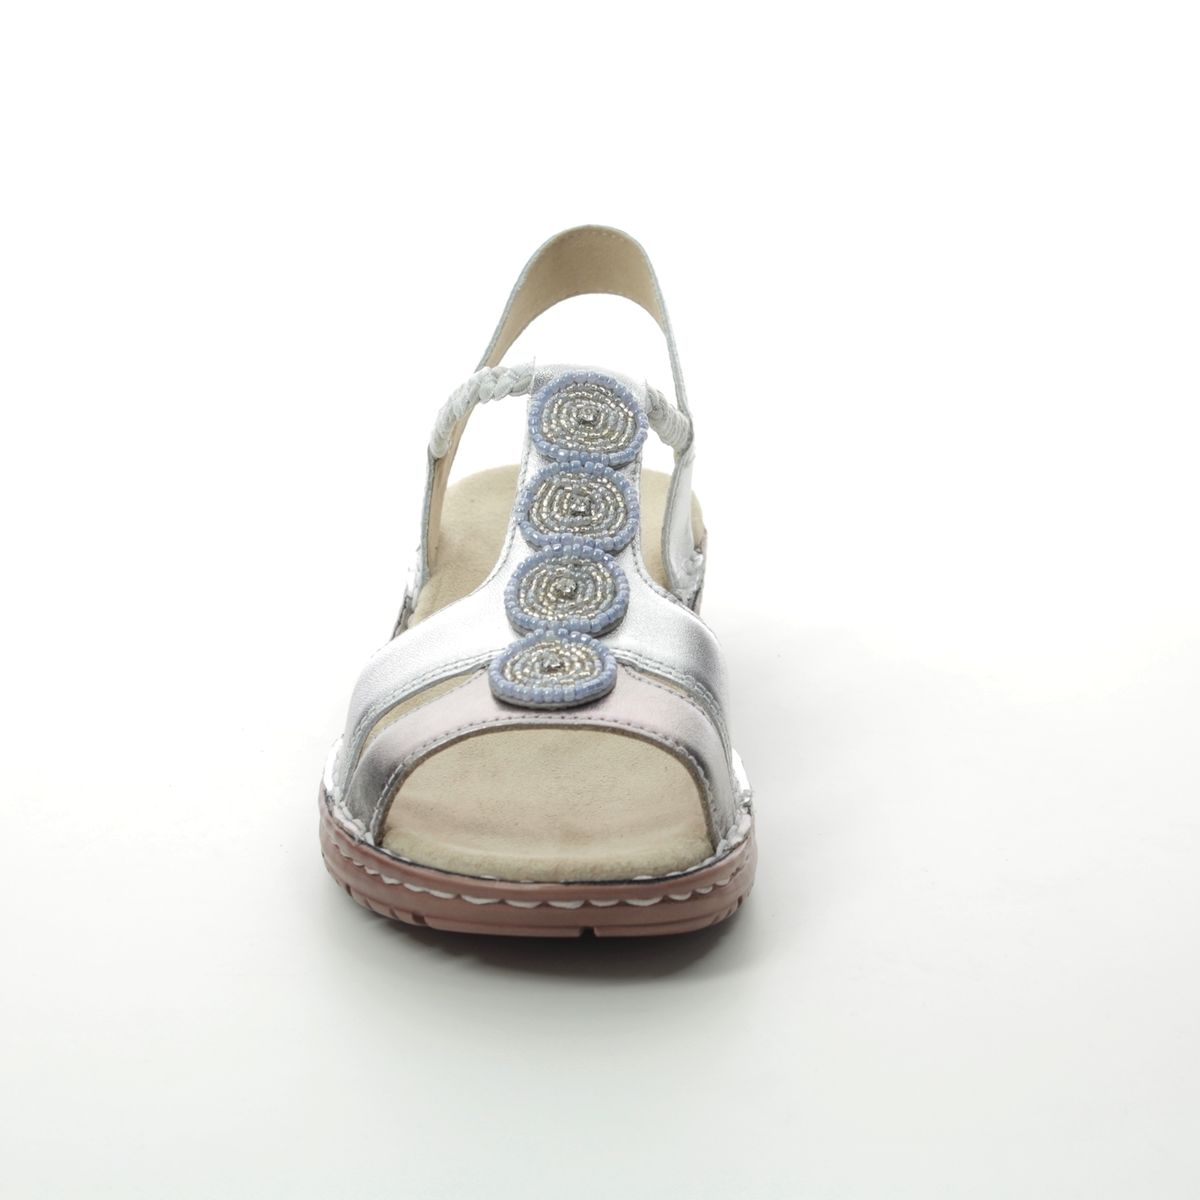 Ara Hawaii Beads 01 27217-76 Silver Leather Comfortable Sandals